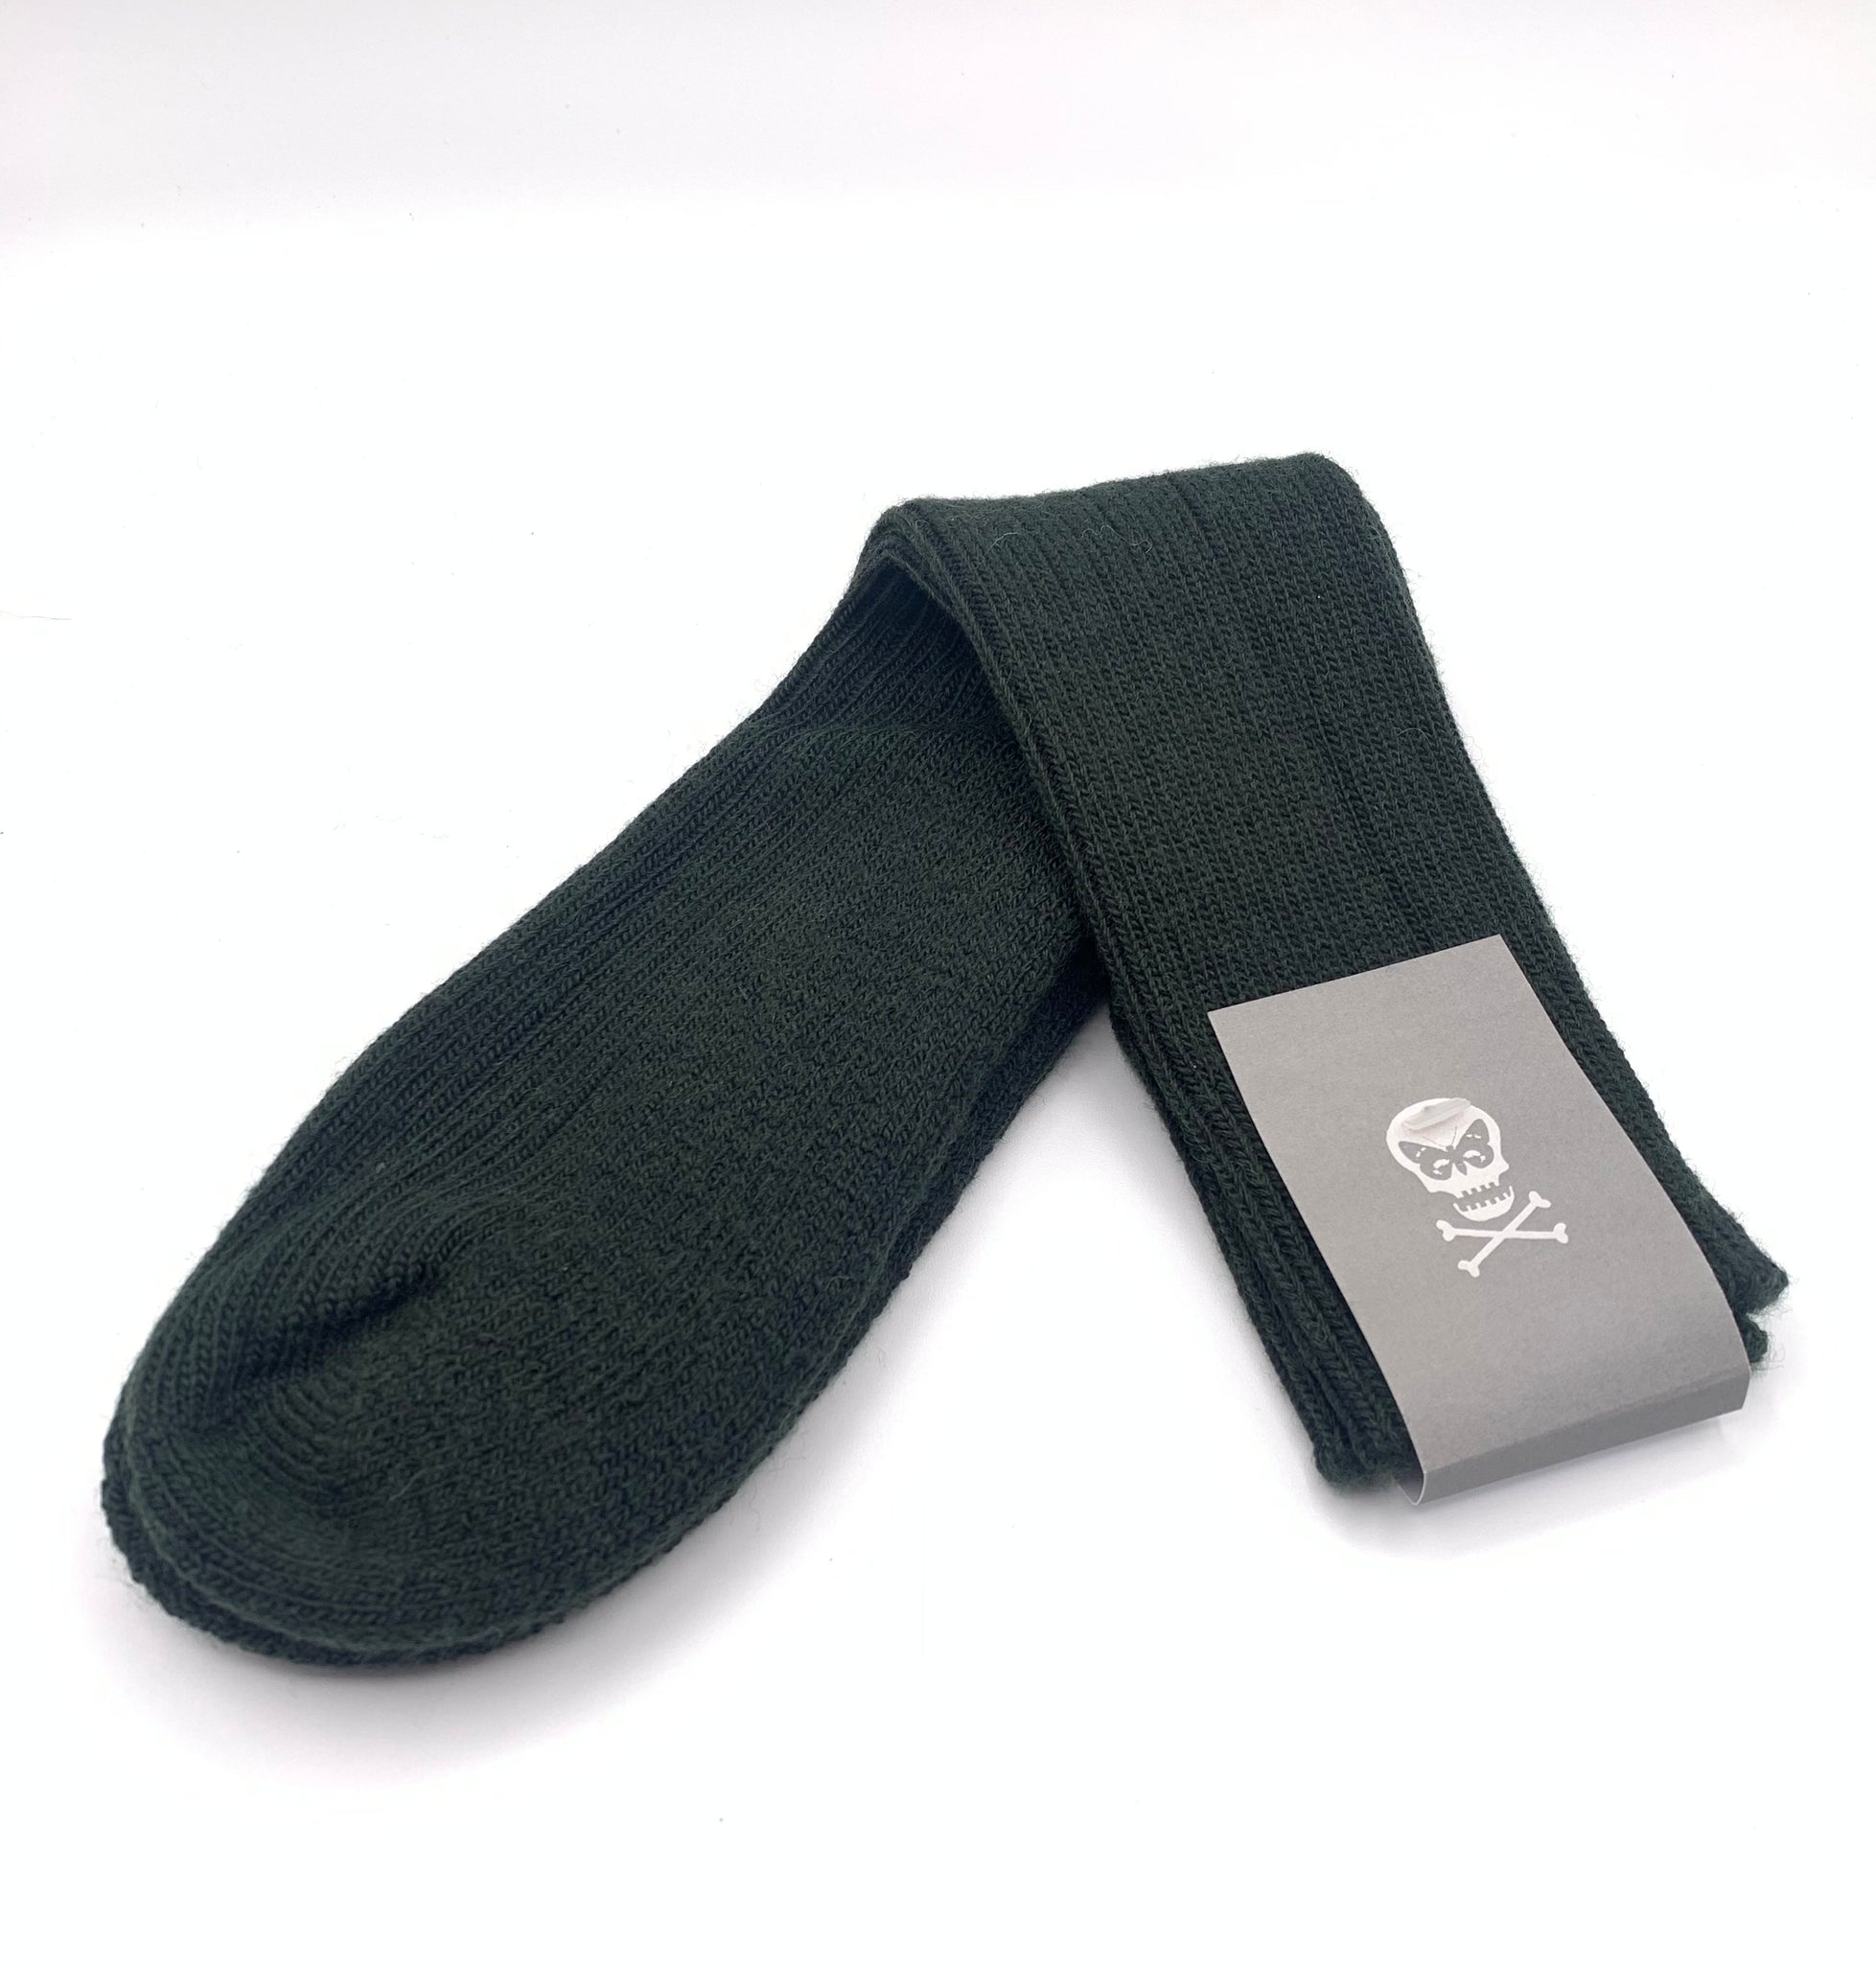 Padded woollen socks in deep green colour by unique contemporary luxury designer Regent, featuring padded heel and toe and natural moisture wicking properties.